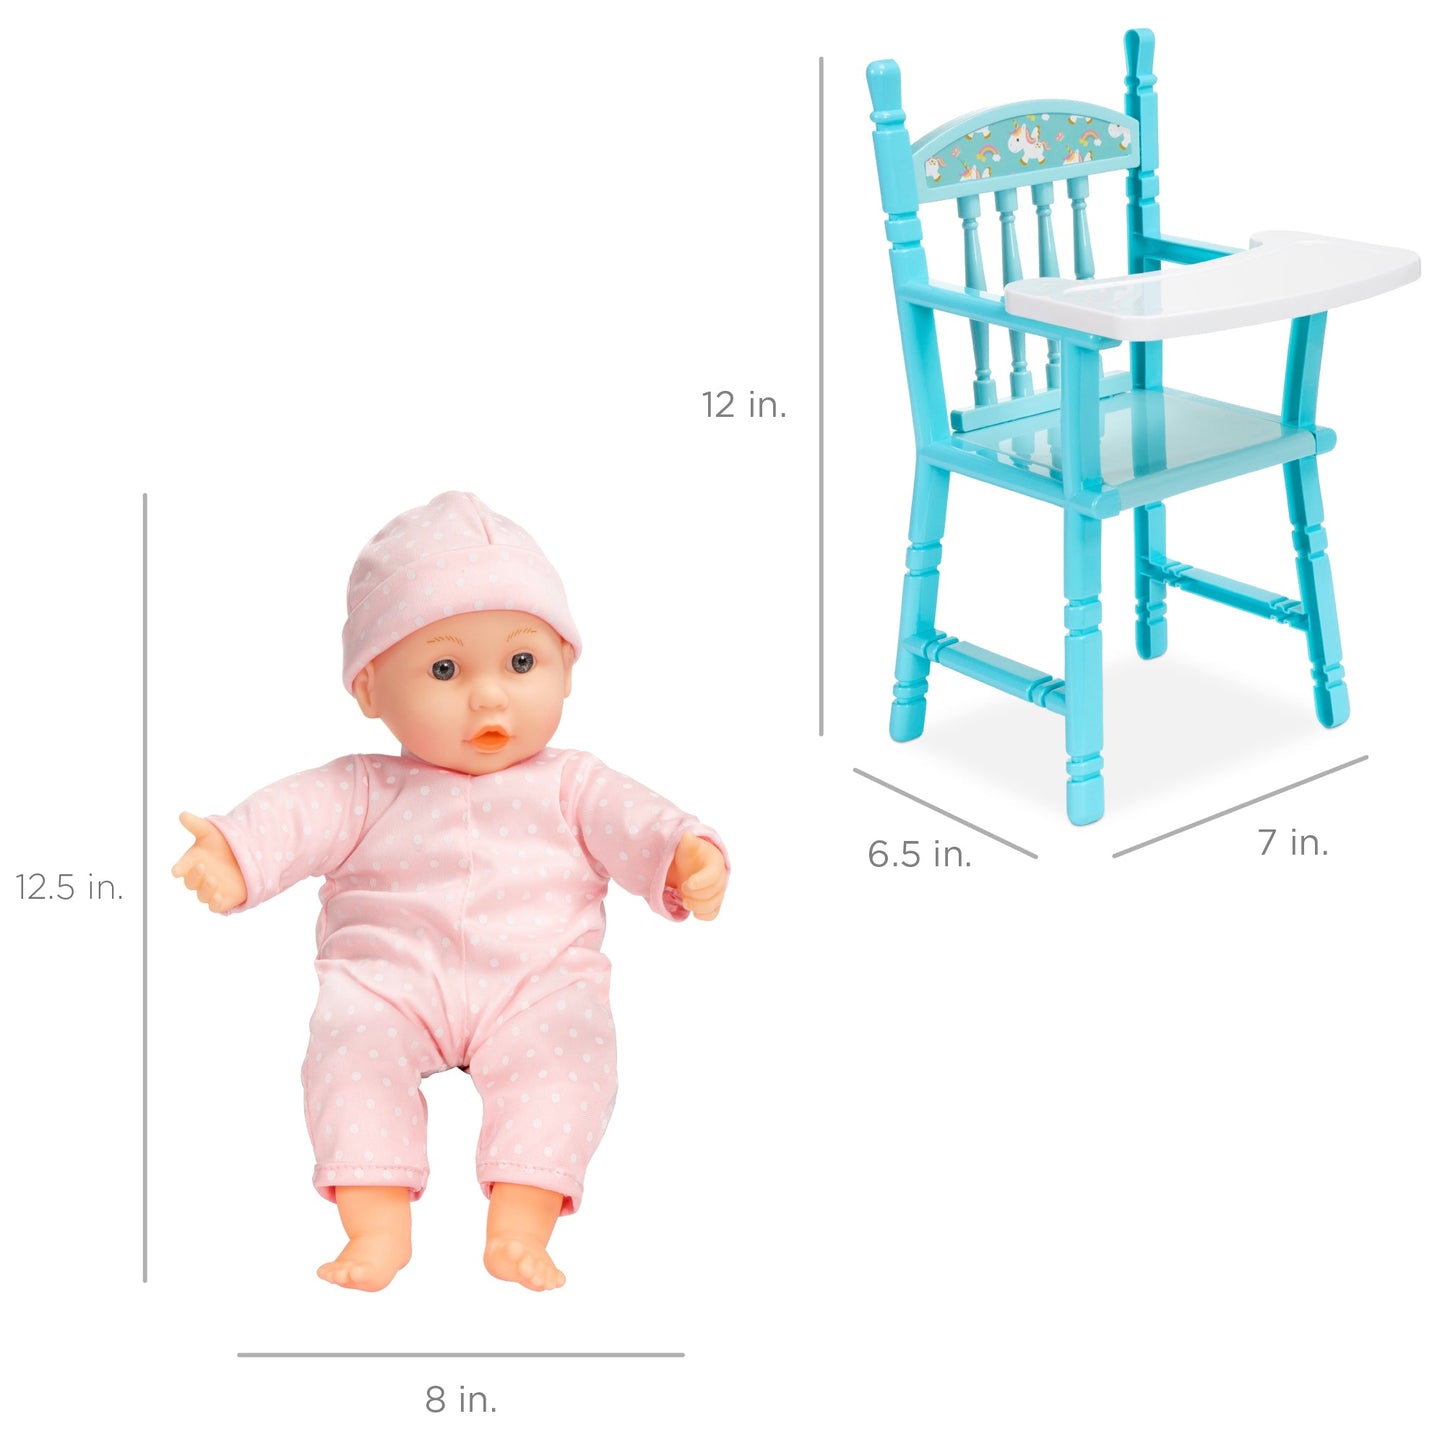 Realistic Baby Doll with Soft Body, Highchair, Potty, Accessories - 12.5in